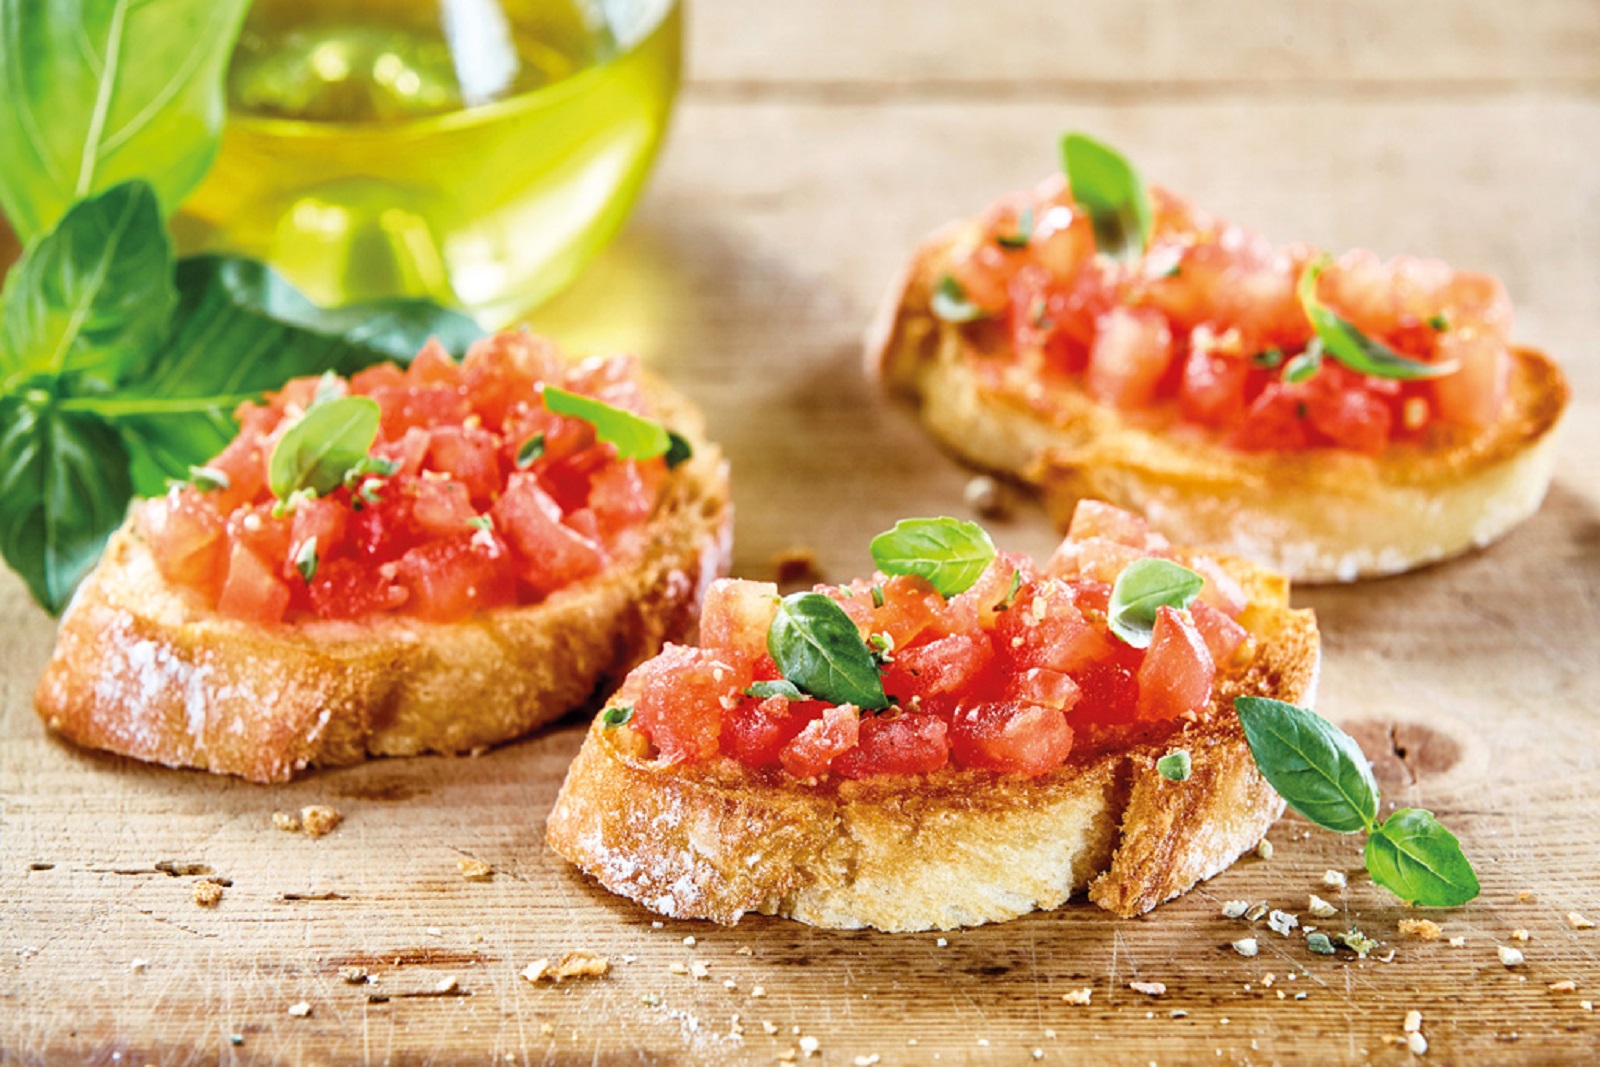 Learn how to prepare delicious tomato bruschetta in this cooking class in Florence